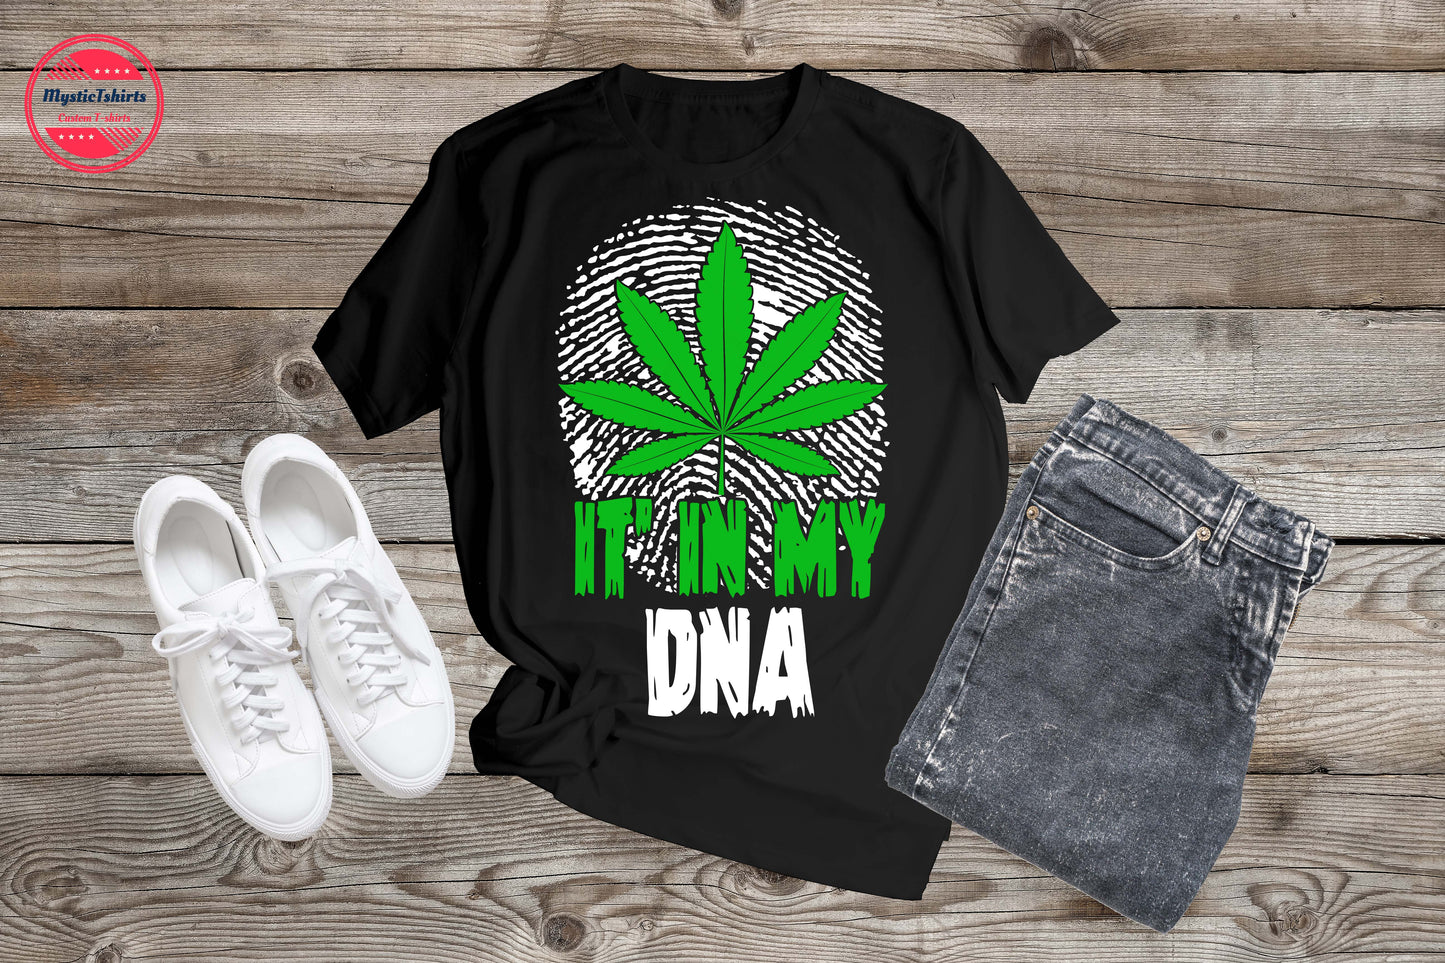 240. IN MY DNA, Custom Made Shirt, Personalized T-Shirt, Custom Text, Make Your Own Shirt, Custom Tee